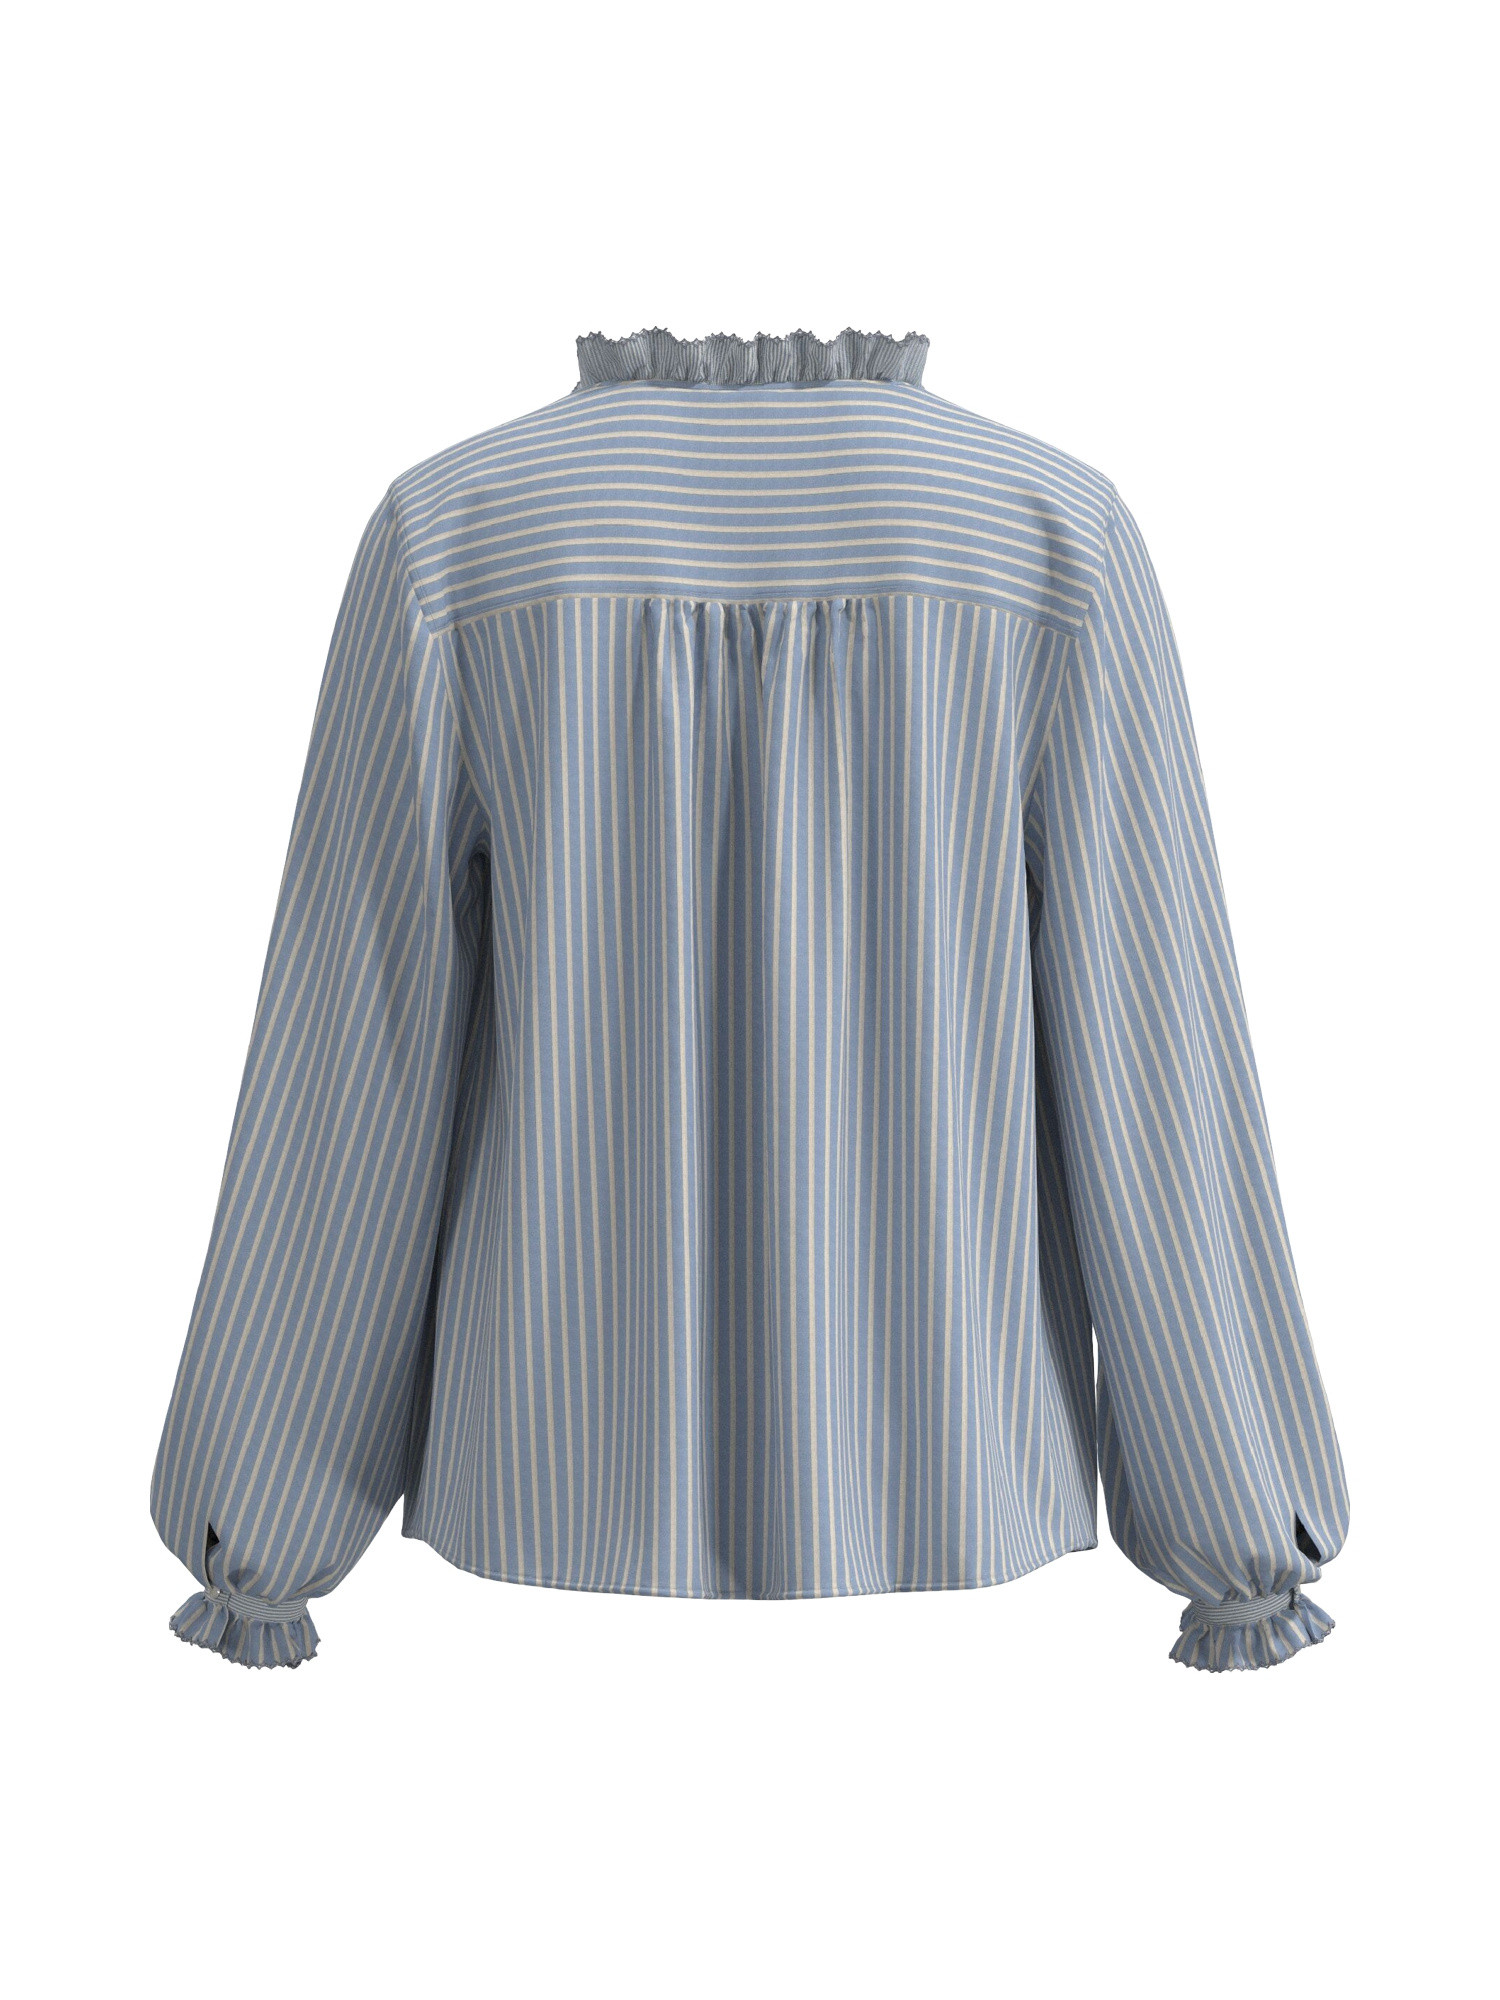 Pepe Jeans - Striped shirt in cotton, Light Blue, large image number 1